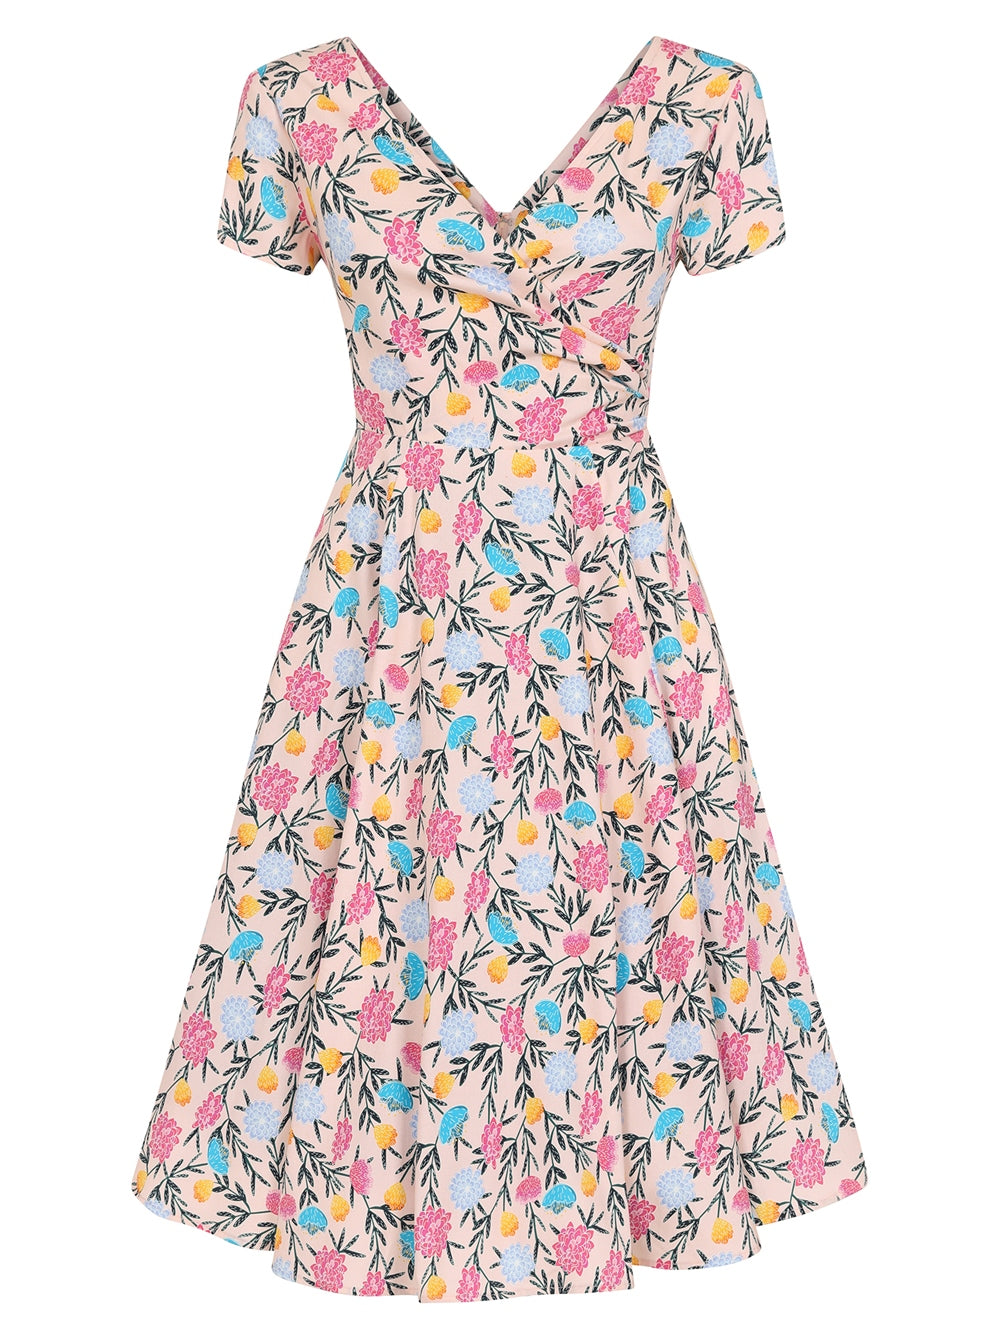 Maria Floral Whimsy Swing Dress by Collectif - Isabel’s Retro & Vintage Clothing